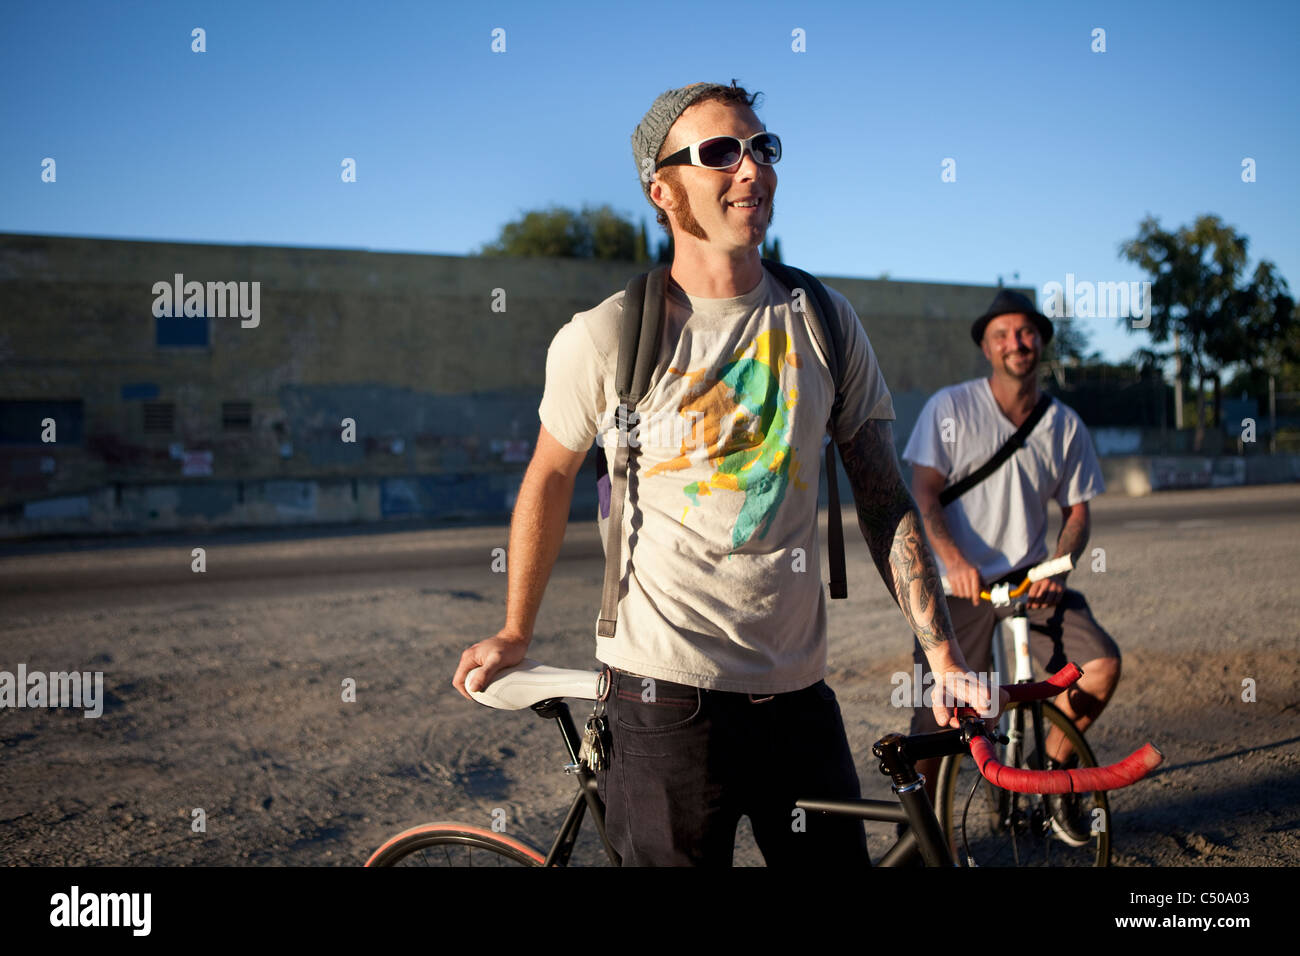 Caucasian bicycle messengers stopping on city street Stock Photo